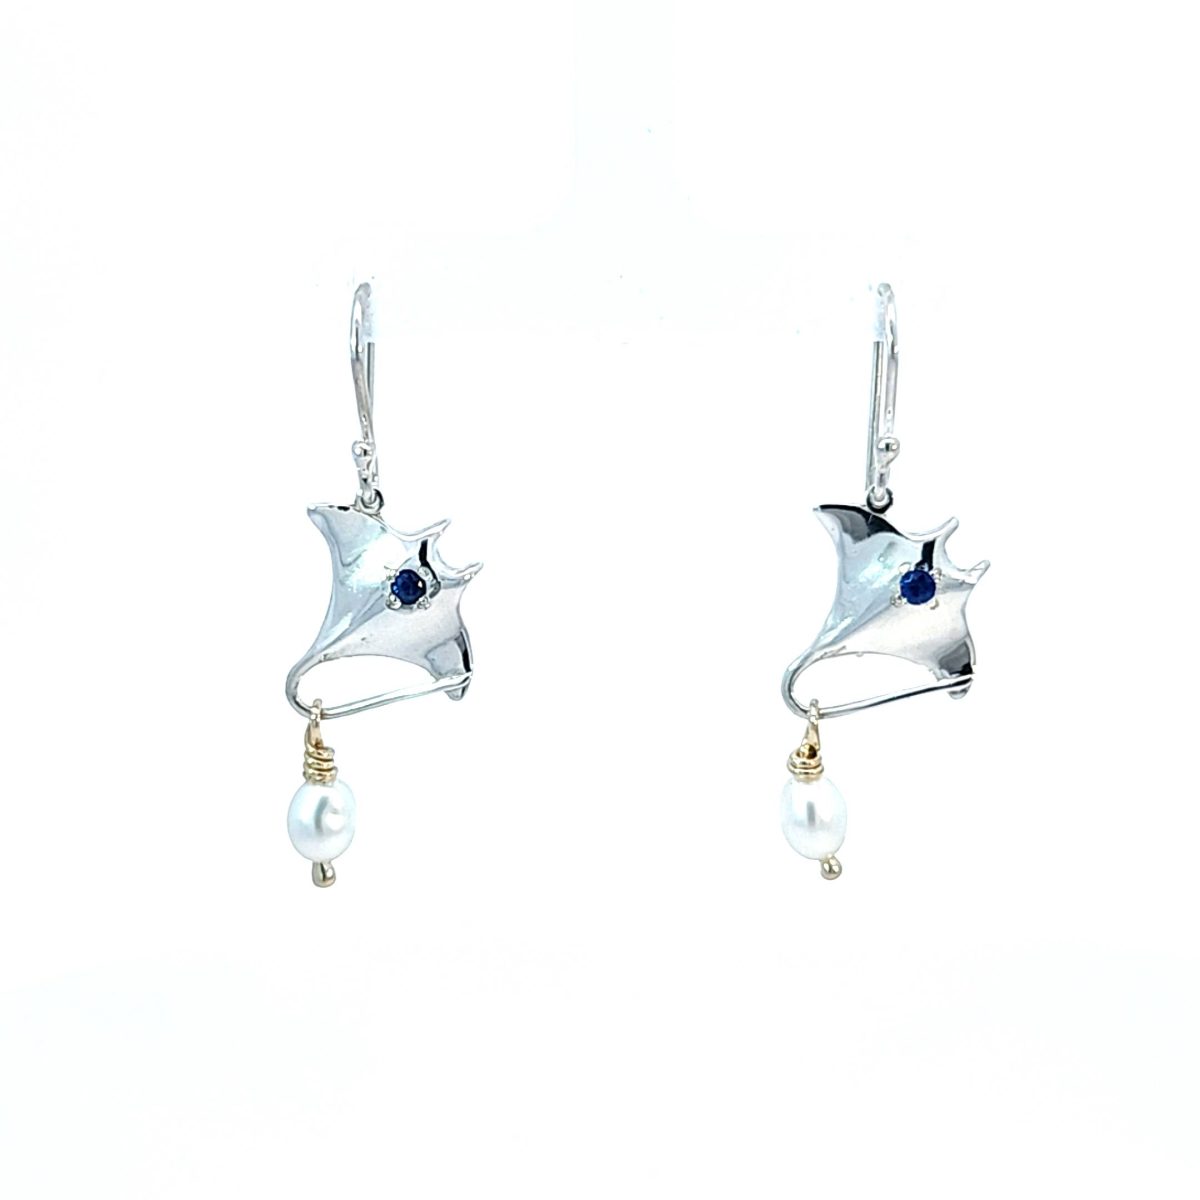 Coral Bay Collection Sterling Silver Manta Ray Earrings